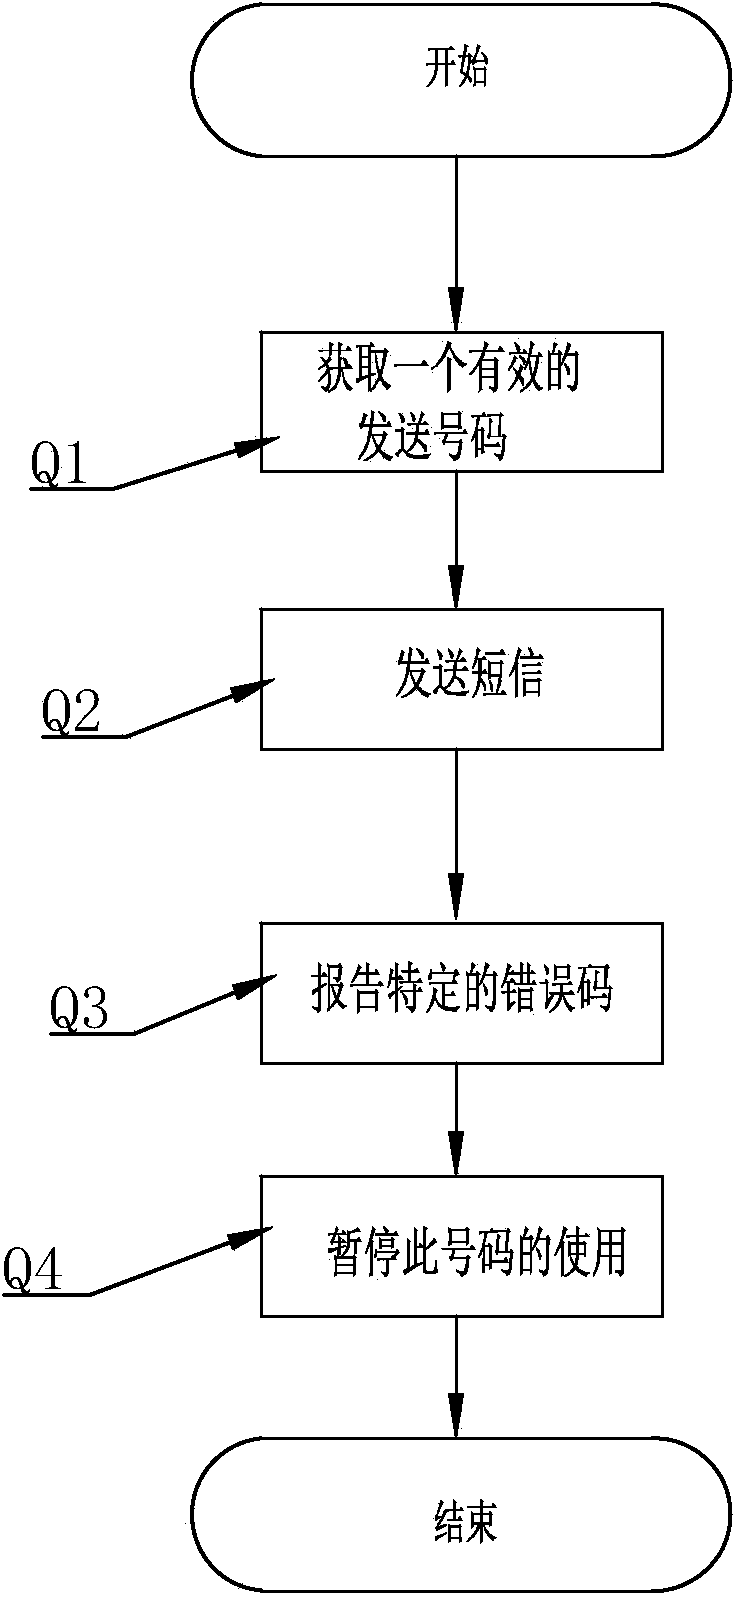 Multi-dimension based invalid number detecting system and method